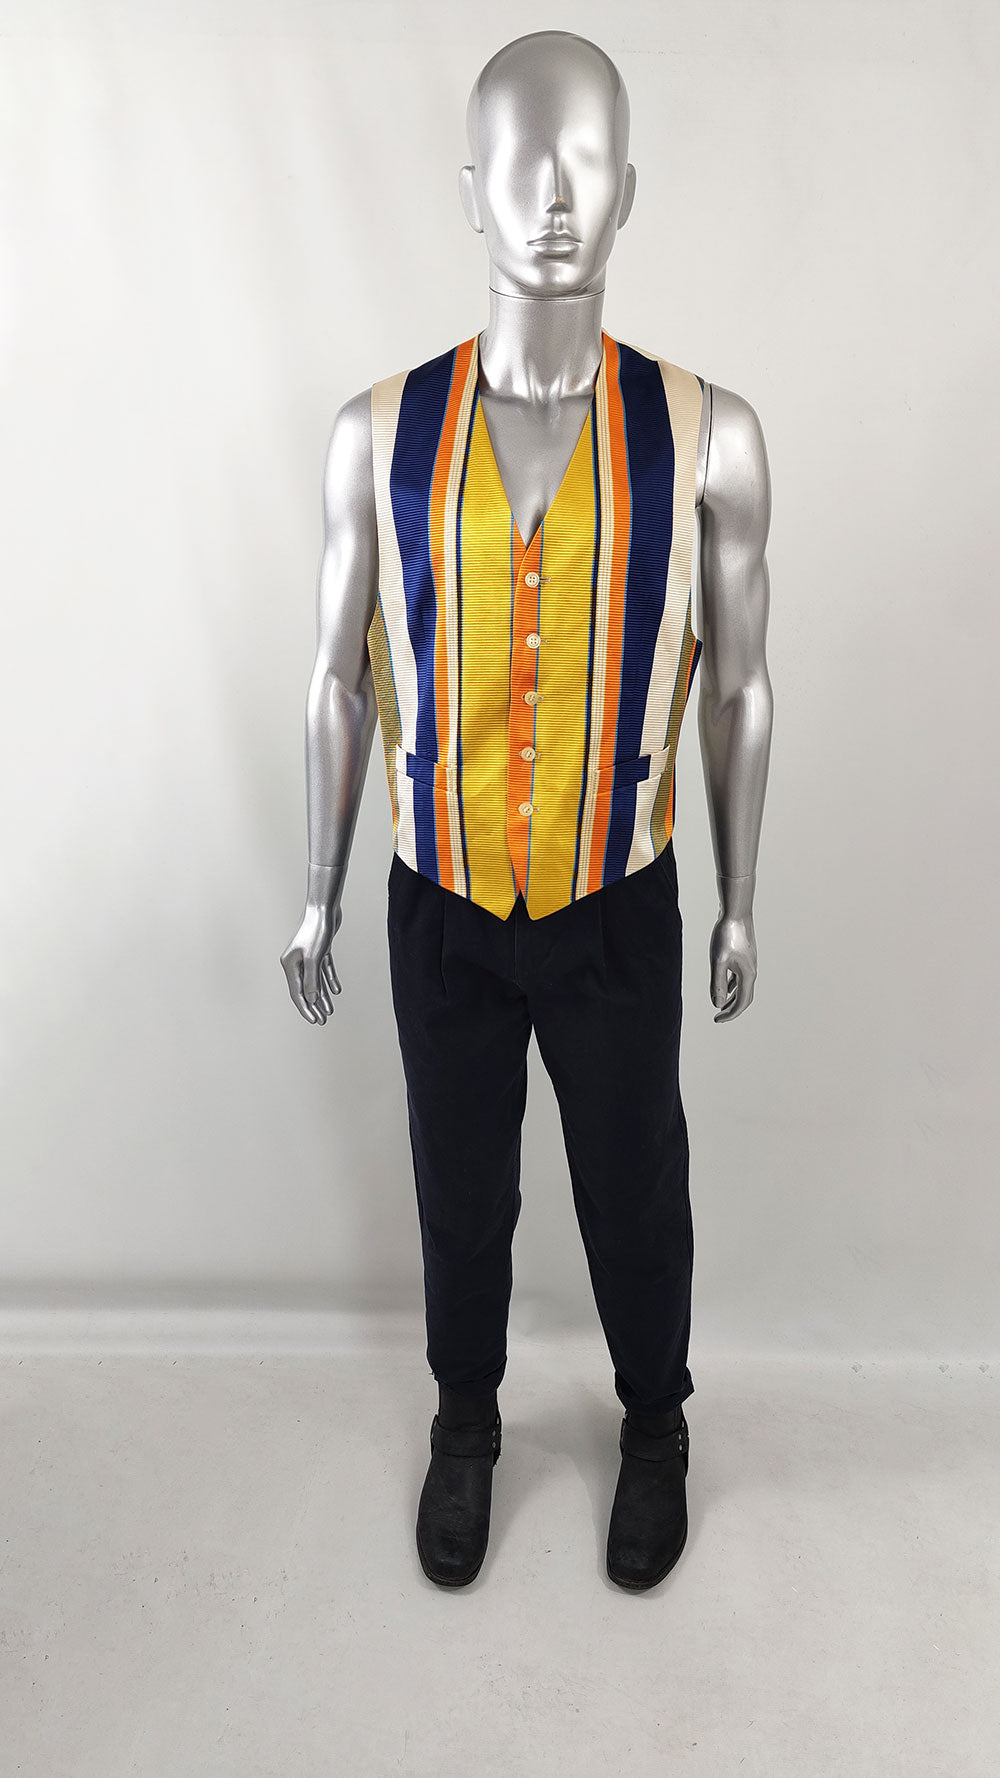 A vintage Kenzo vest for men from the 90s in a blue, orange and cream silk.